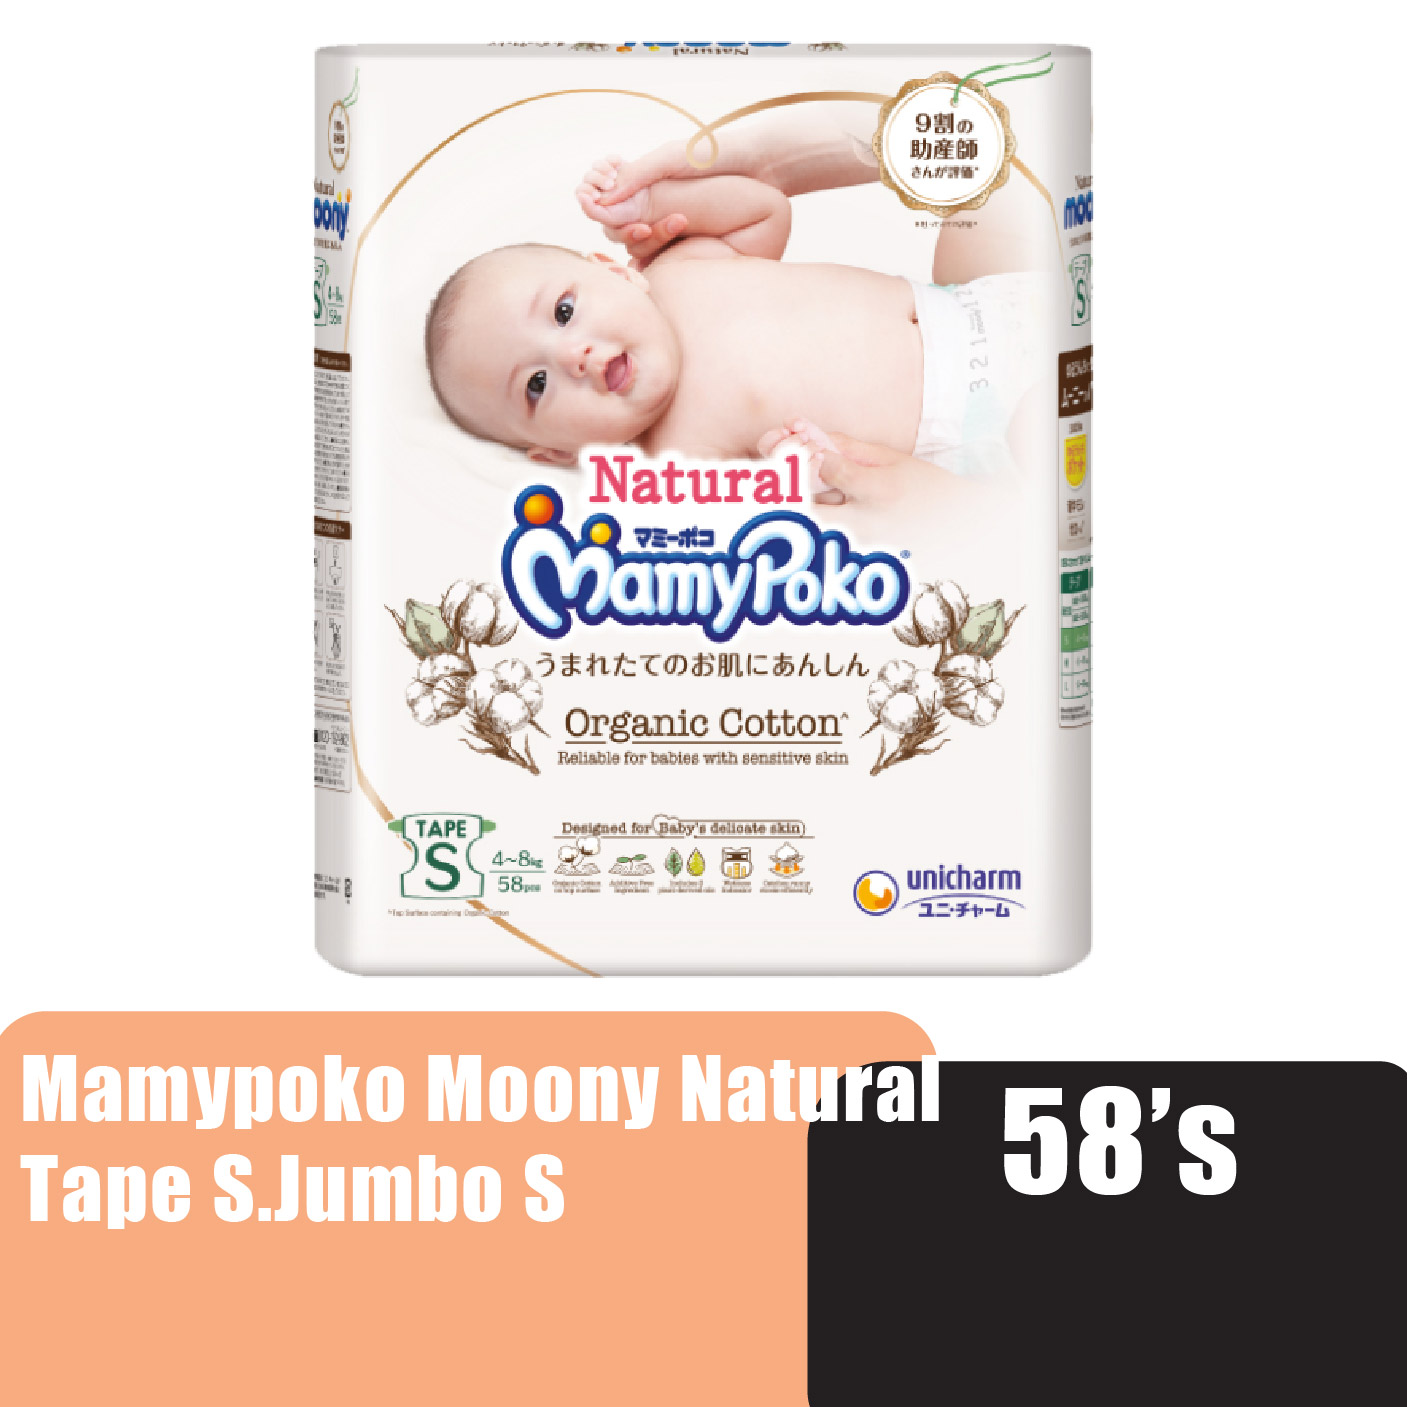 Mamypoko Moony Natural Organic Cotton Baby Diapers (Tape S) Jumbo S58 / Pempes baby suitable for sensitive skin